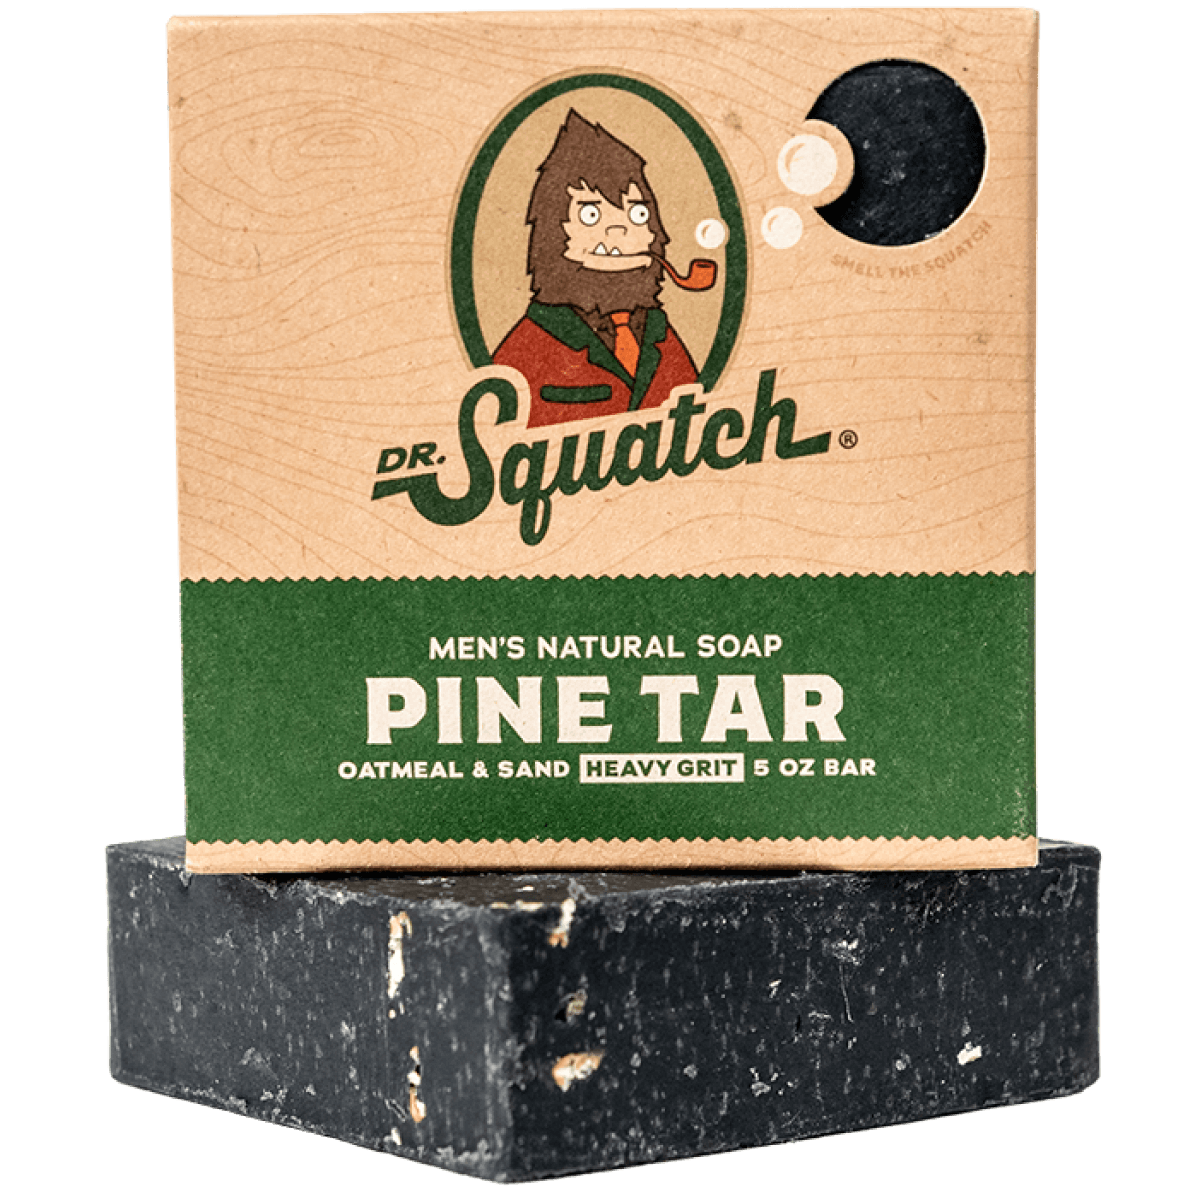 Dr. Squatch You Pick Your Soap Optional Soap Saver Pouch 5 oz - Free Shipping